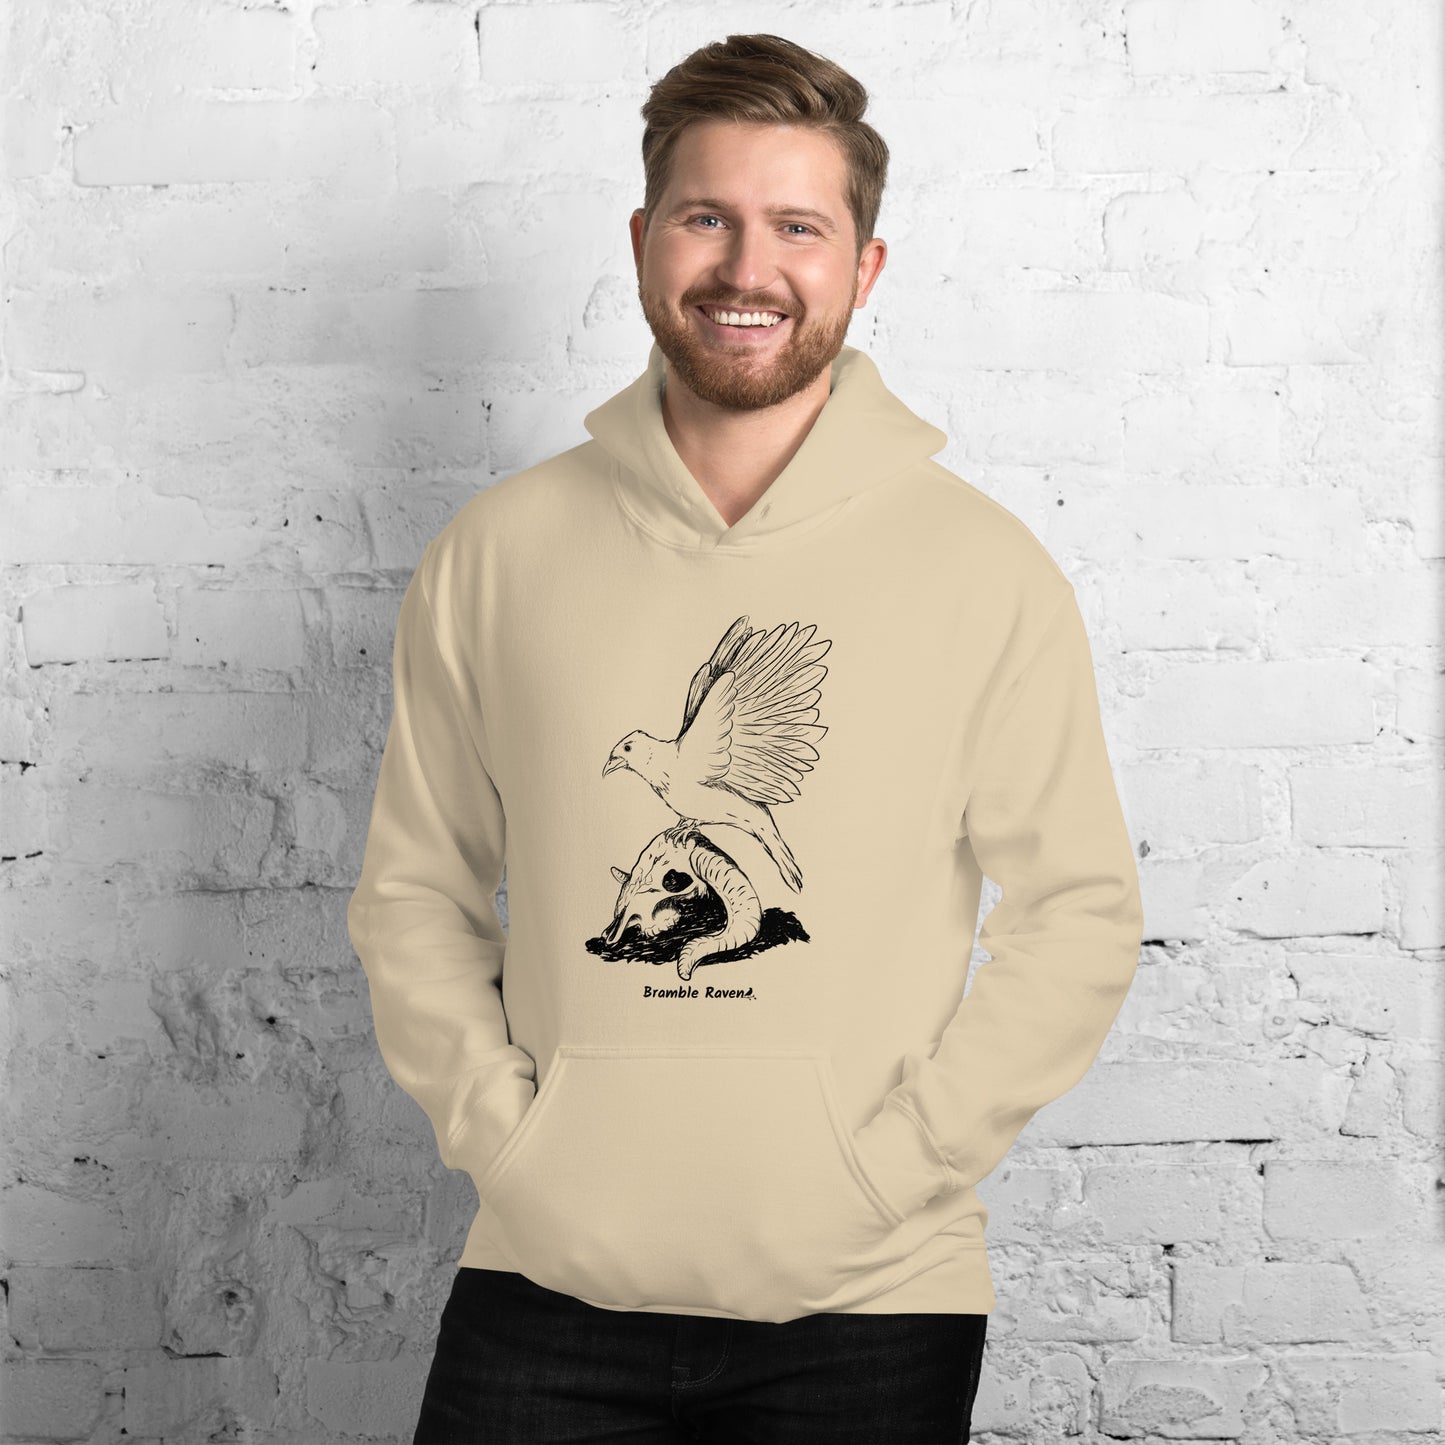 Sand colored unisex Reflections hoodie. Features image of a crow with wings outstretched sitting on a sheep skull.  Has a front pouch pocket and double lined hood. Shown on male model by white brick wall.